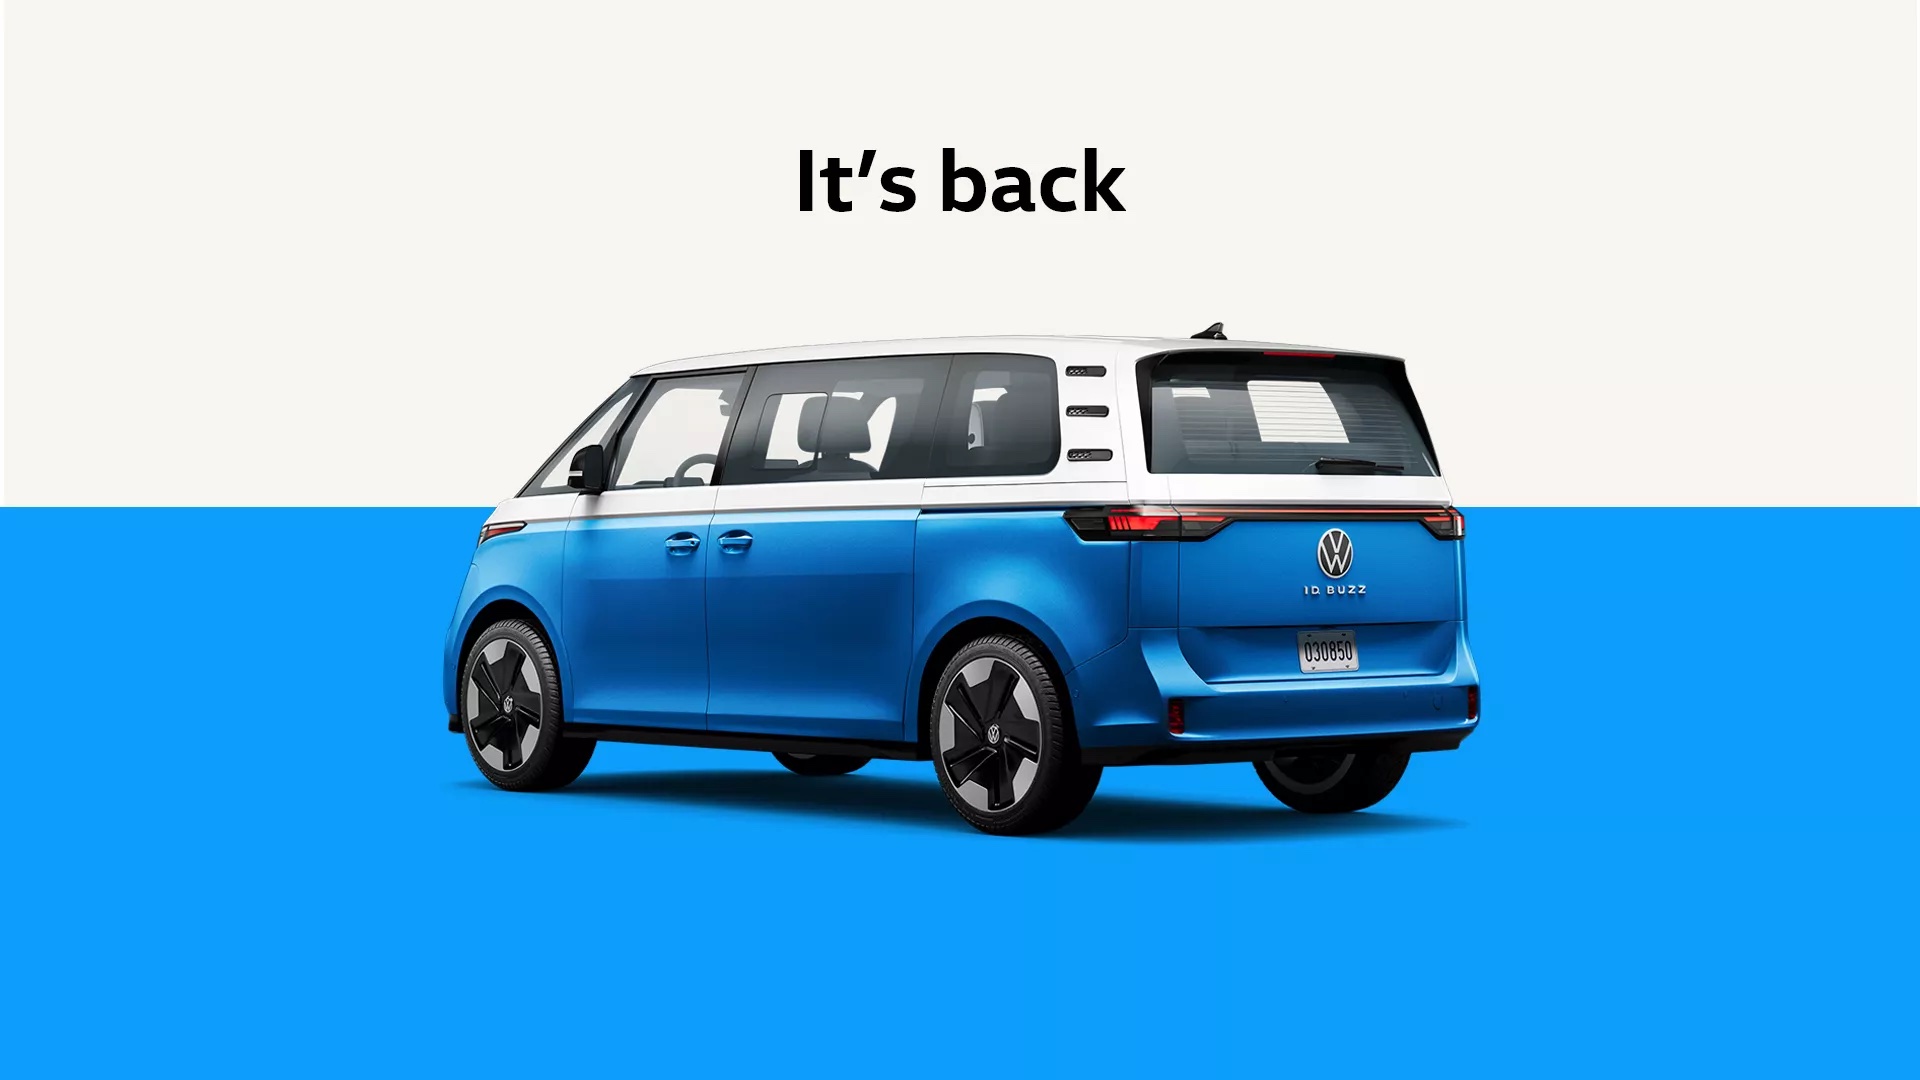 "It's Back" is the text on the 2024 Volkswagen ID. Buzz image with a rear view of the two-toned microbus.